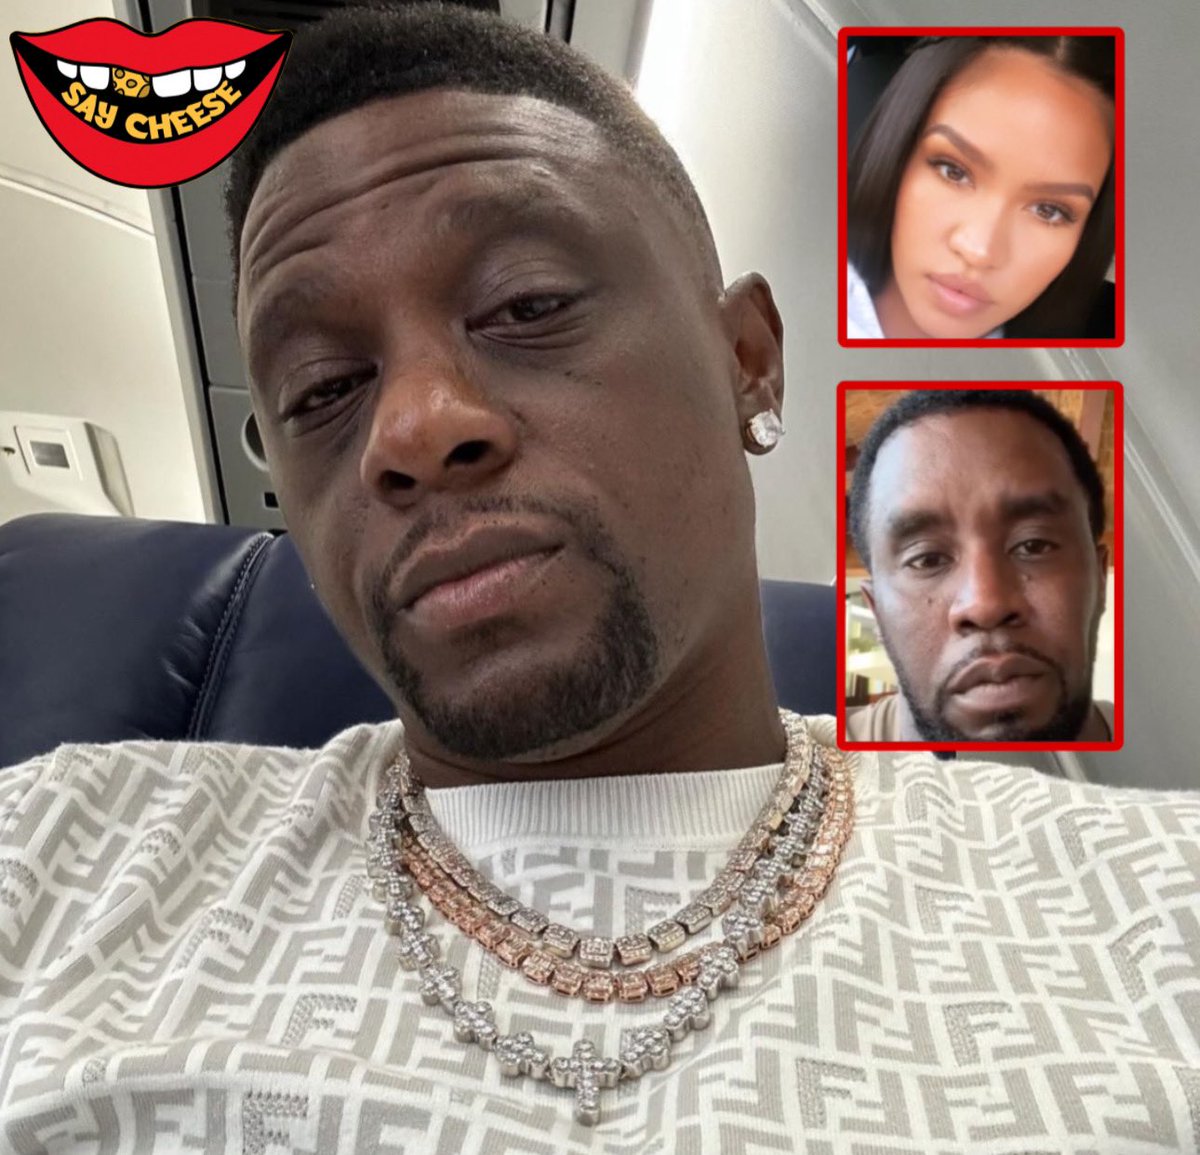 Boosie says Cassie should have received more than $30 million from Diddy for the years of abuse she endured